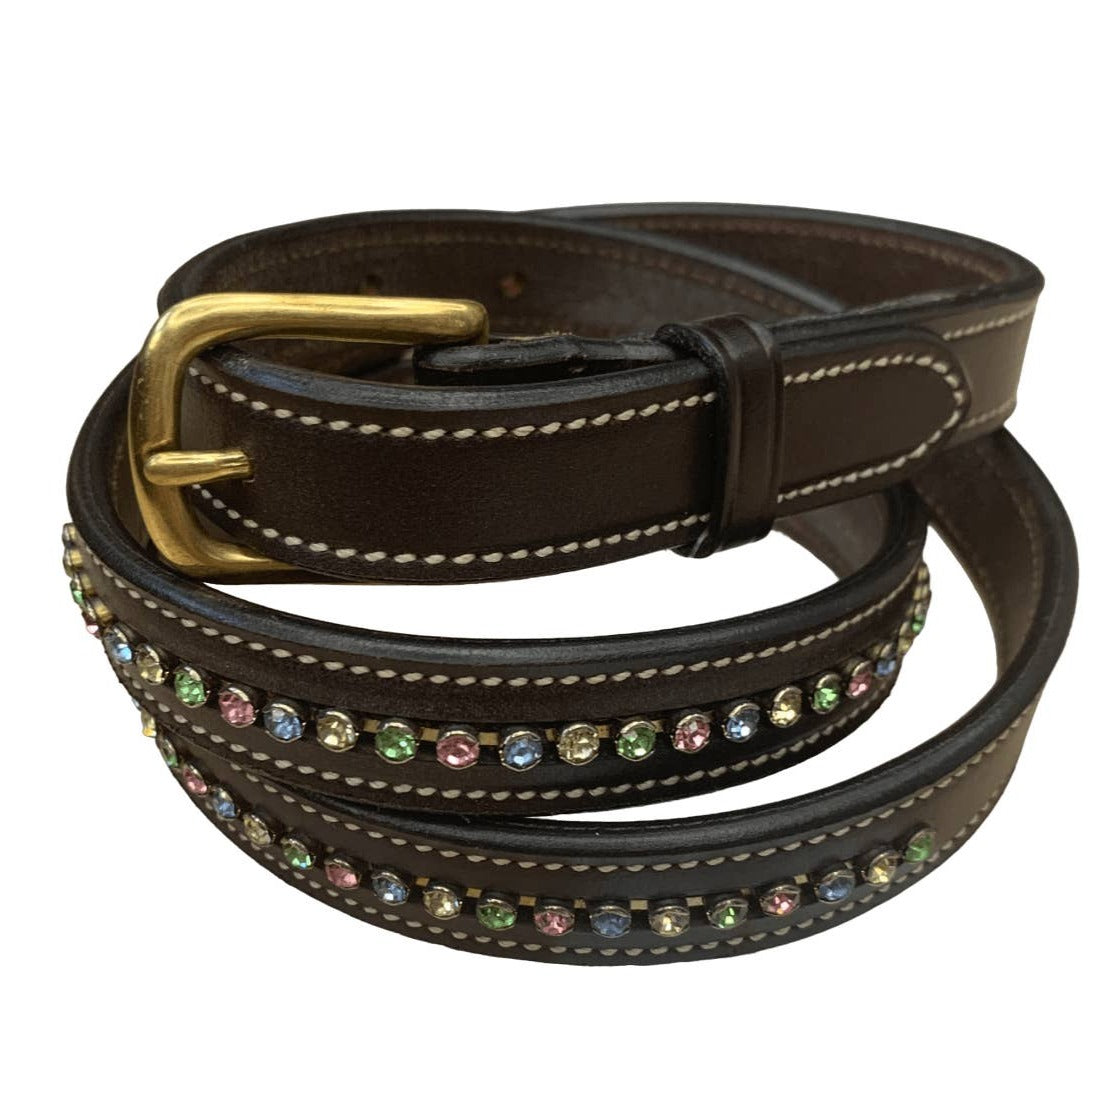 Horse Fare Products (HFP) Rhinestone Riding Belt in Brown - 36